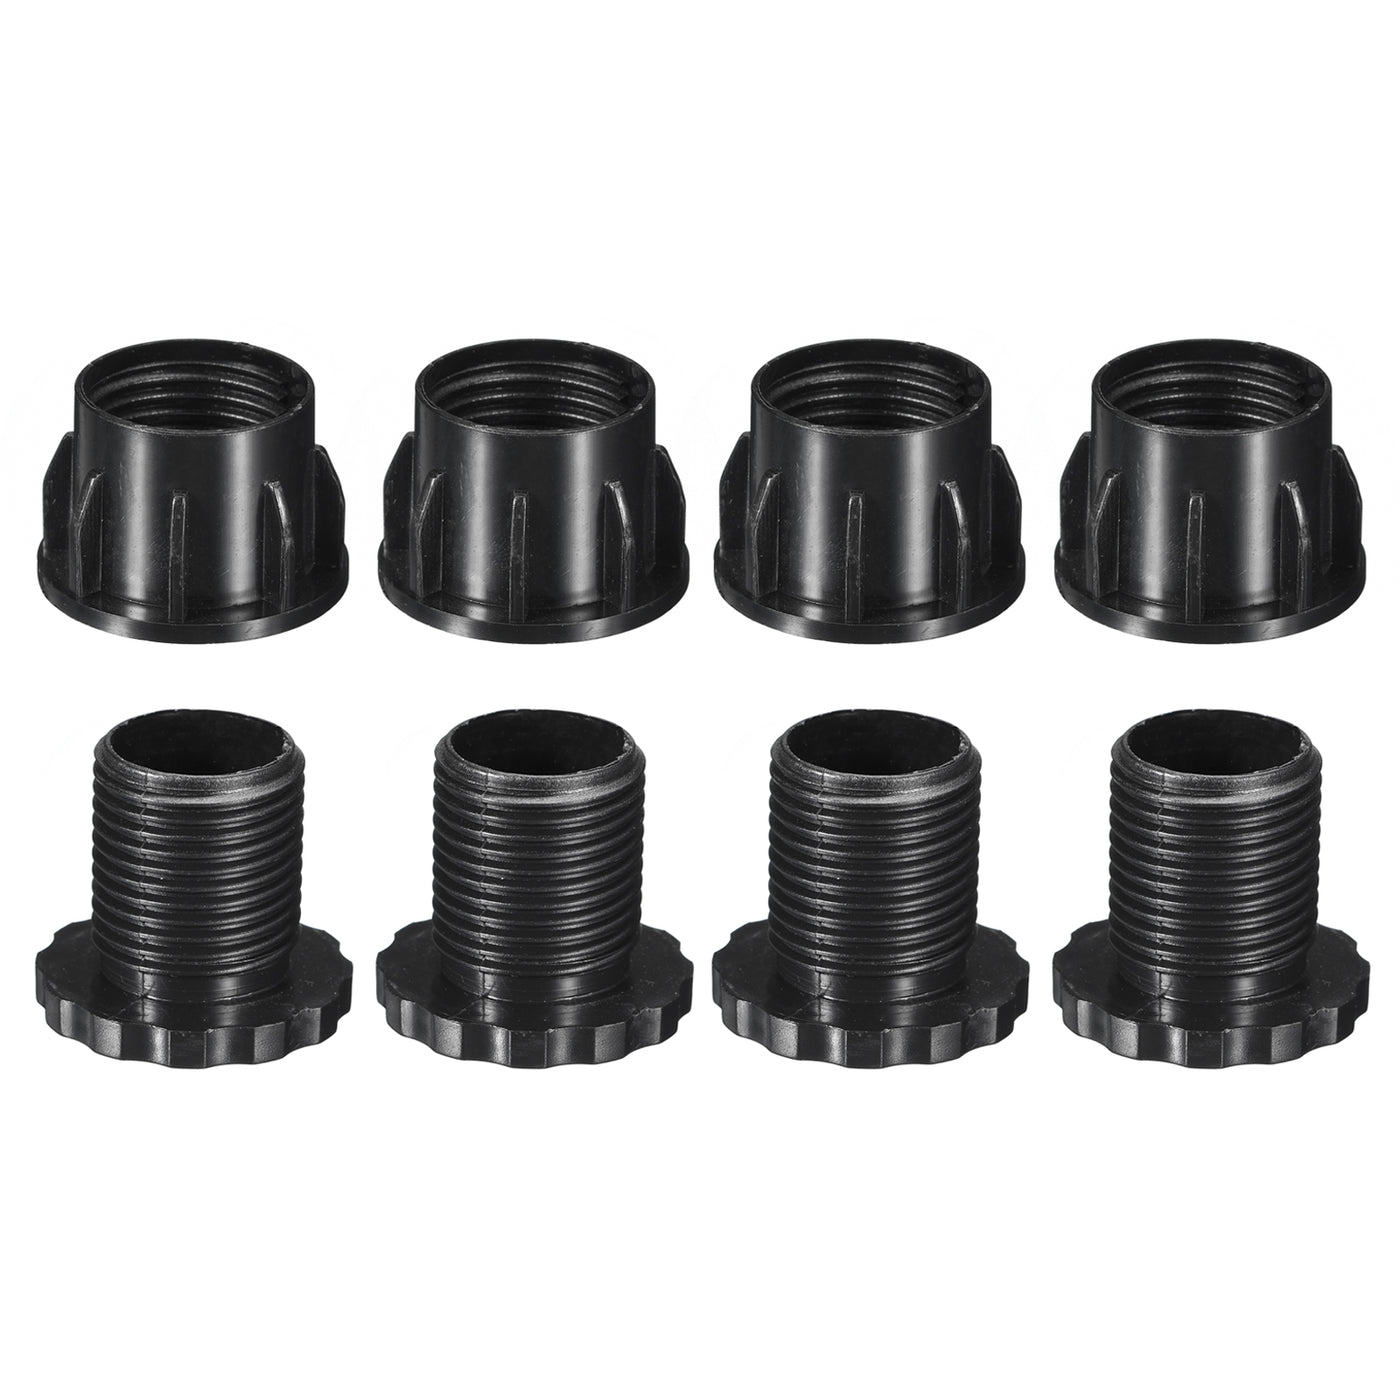 uxcell Uxcell 4Pcs Inserts for Round Tubes with Leveling Feet, for 42mm/1.65" Dia Round Tube